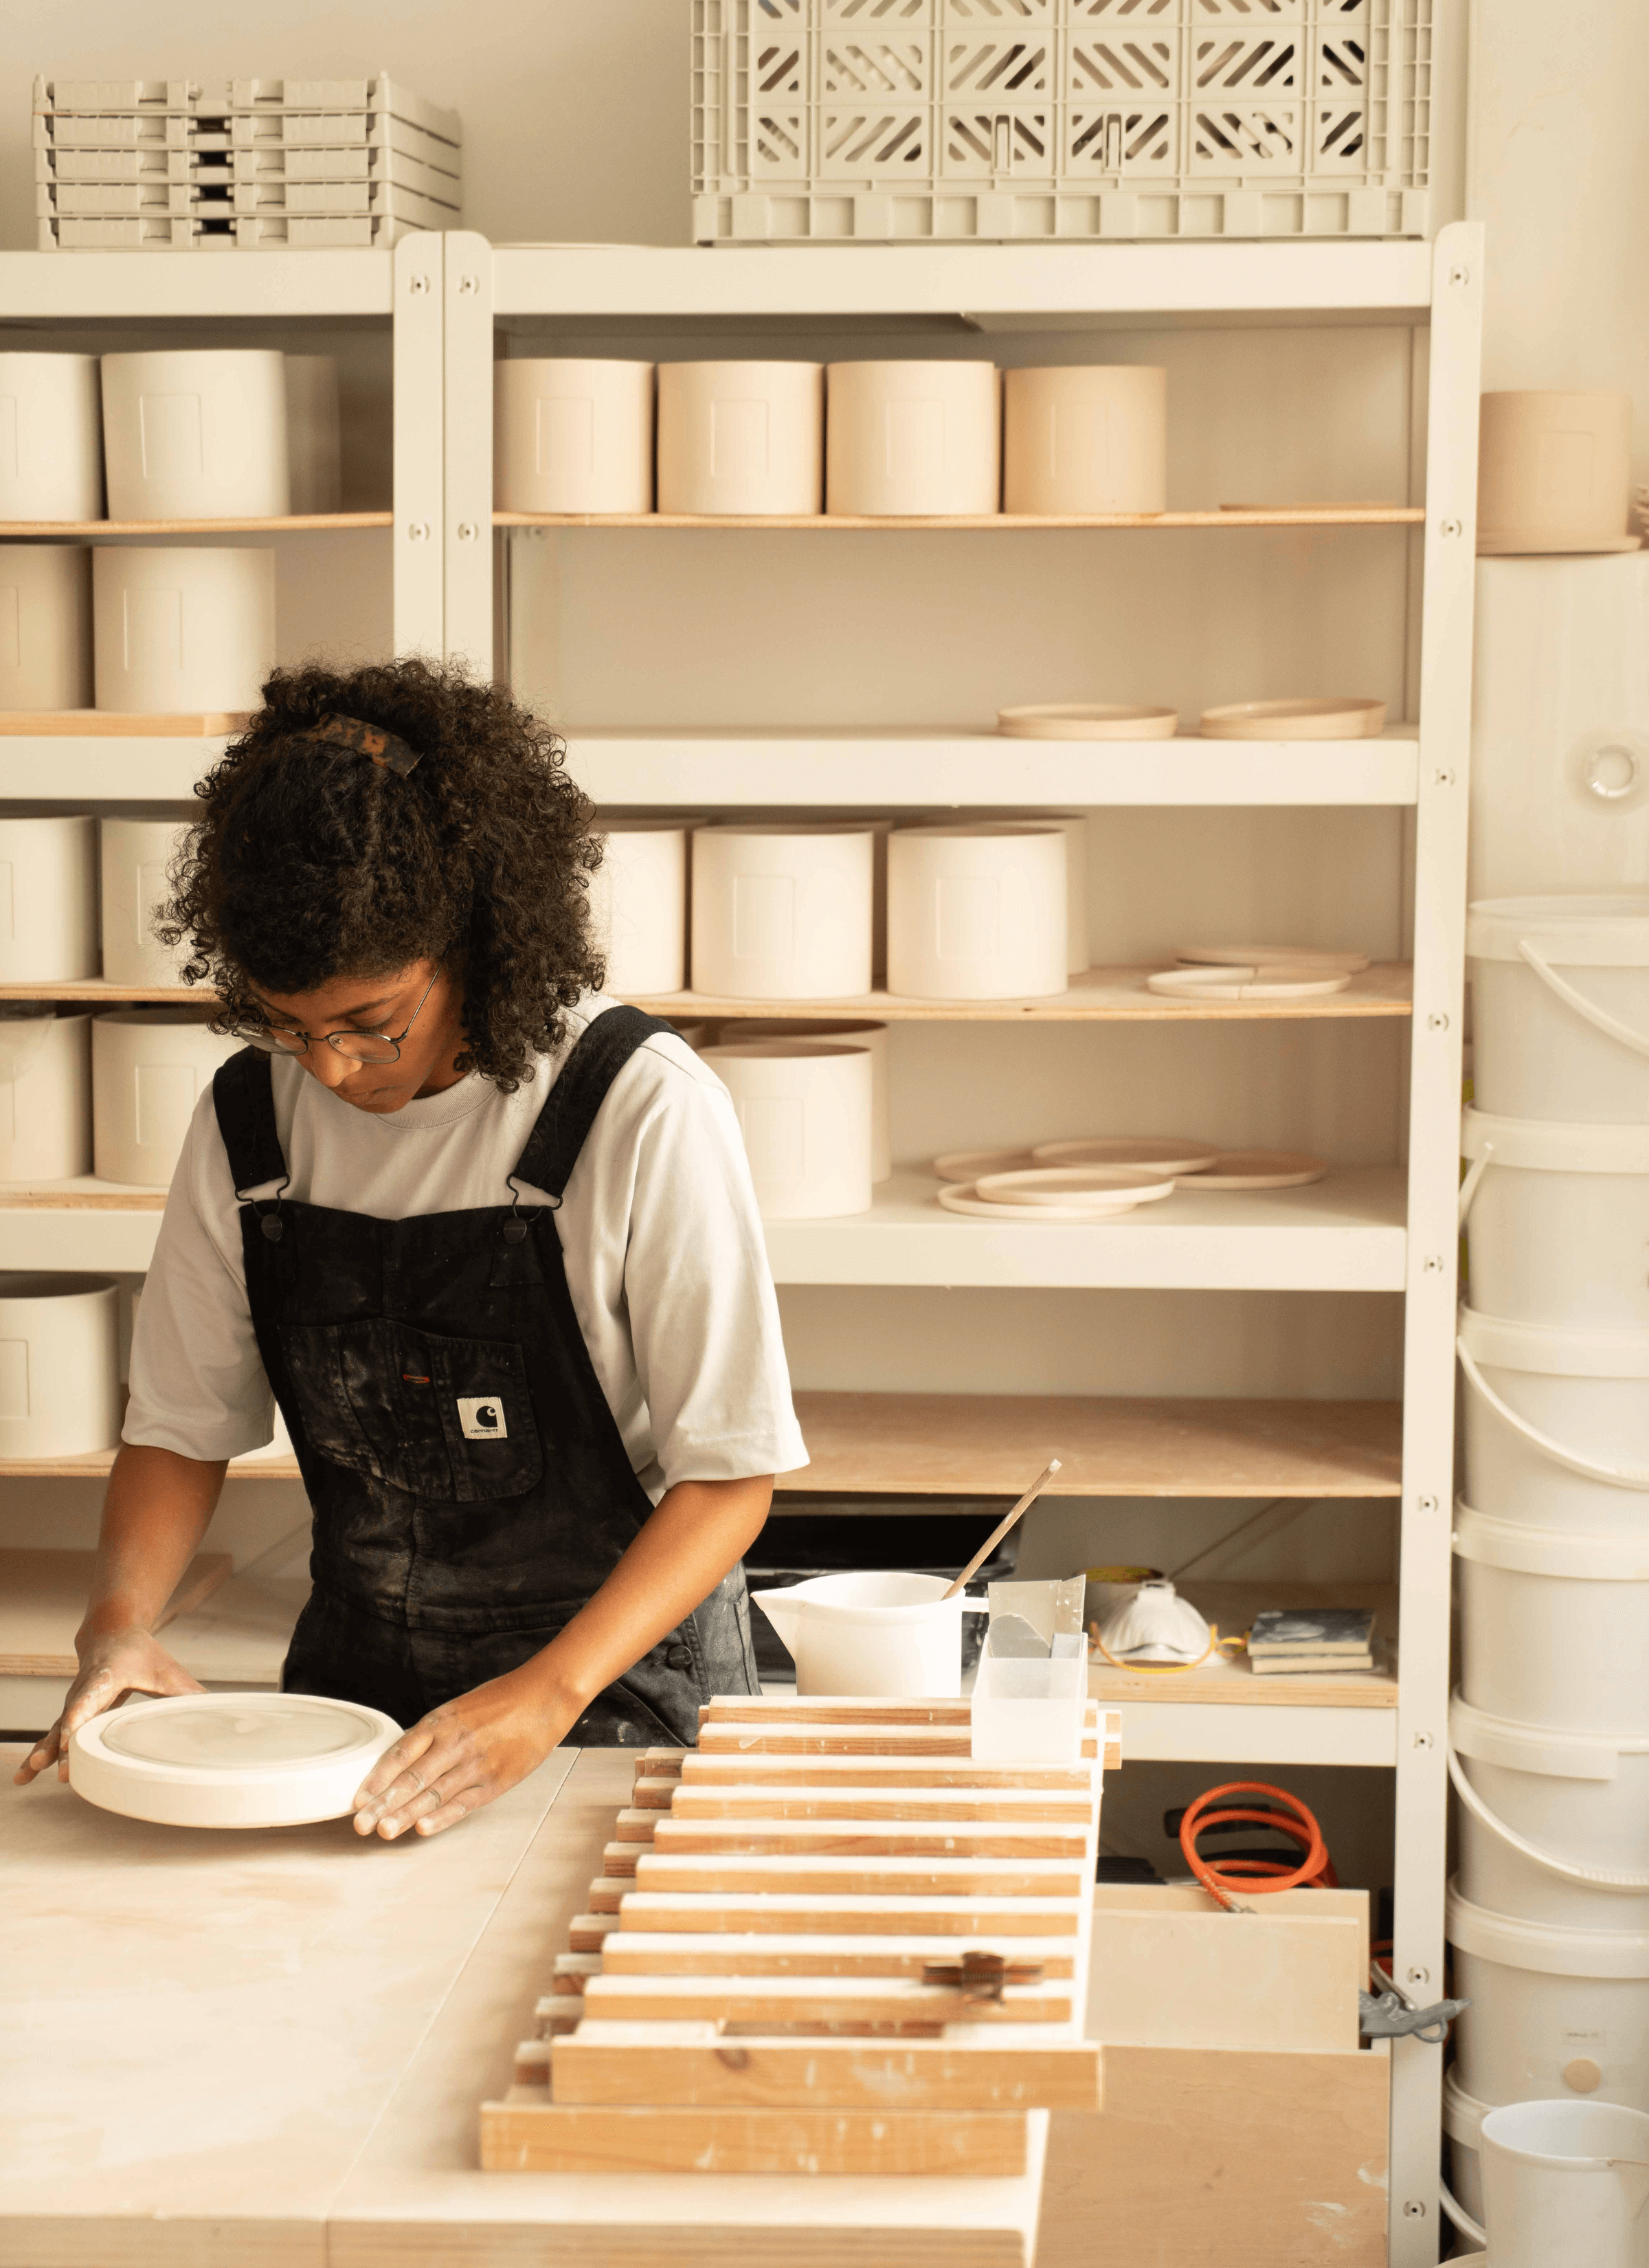 Salima adjusting the project that she is making on the table and she is wearing a cream t-shirt with a black dungarees. There are two wooden crafts on the table that are used to separate undried ceramic projects. Behind Salima, there is a shelf of ceramic pots stocked on the shelf with some ceramic saucers as well.